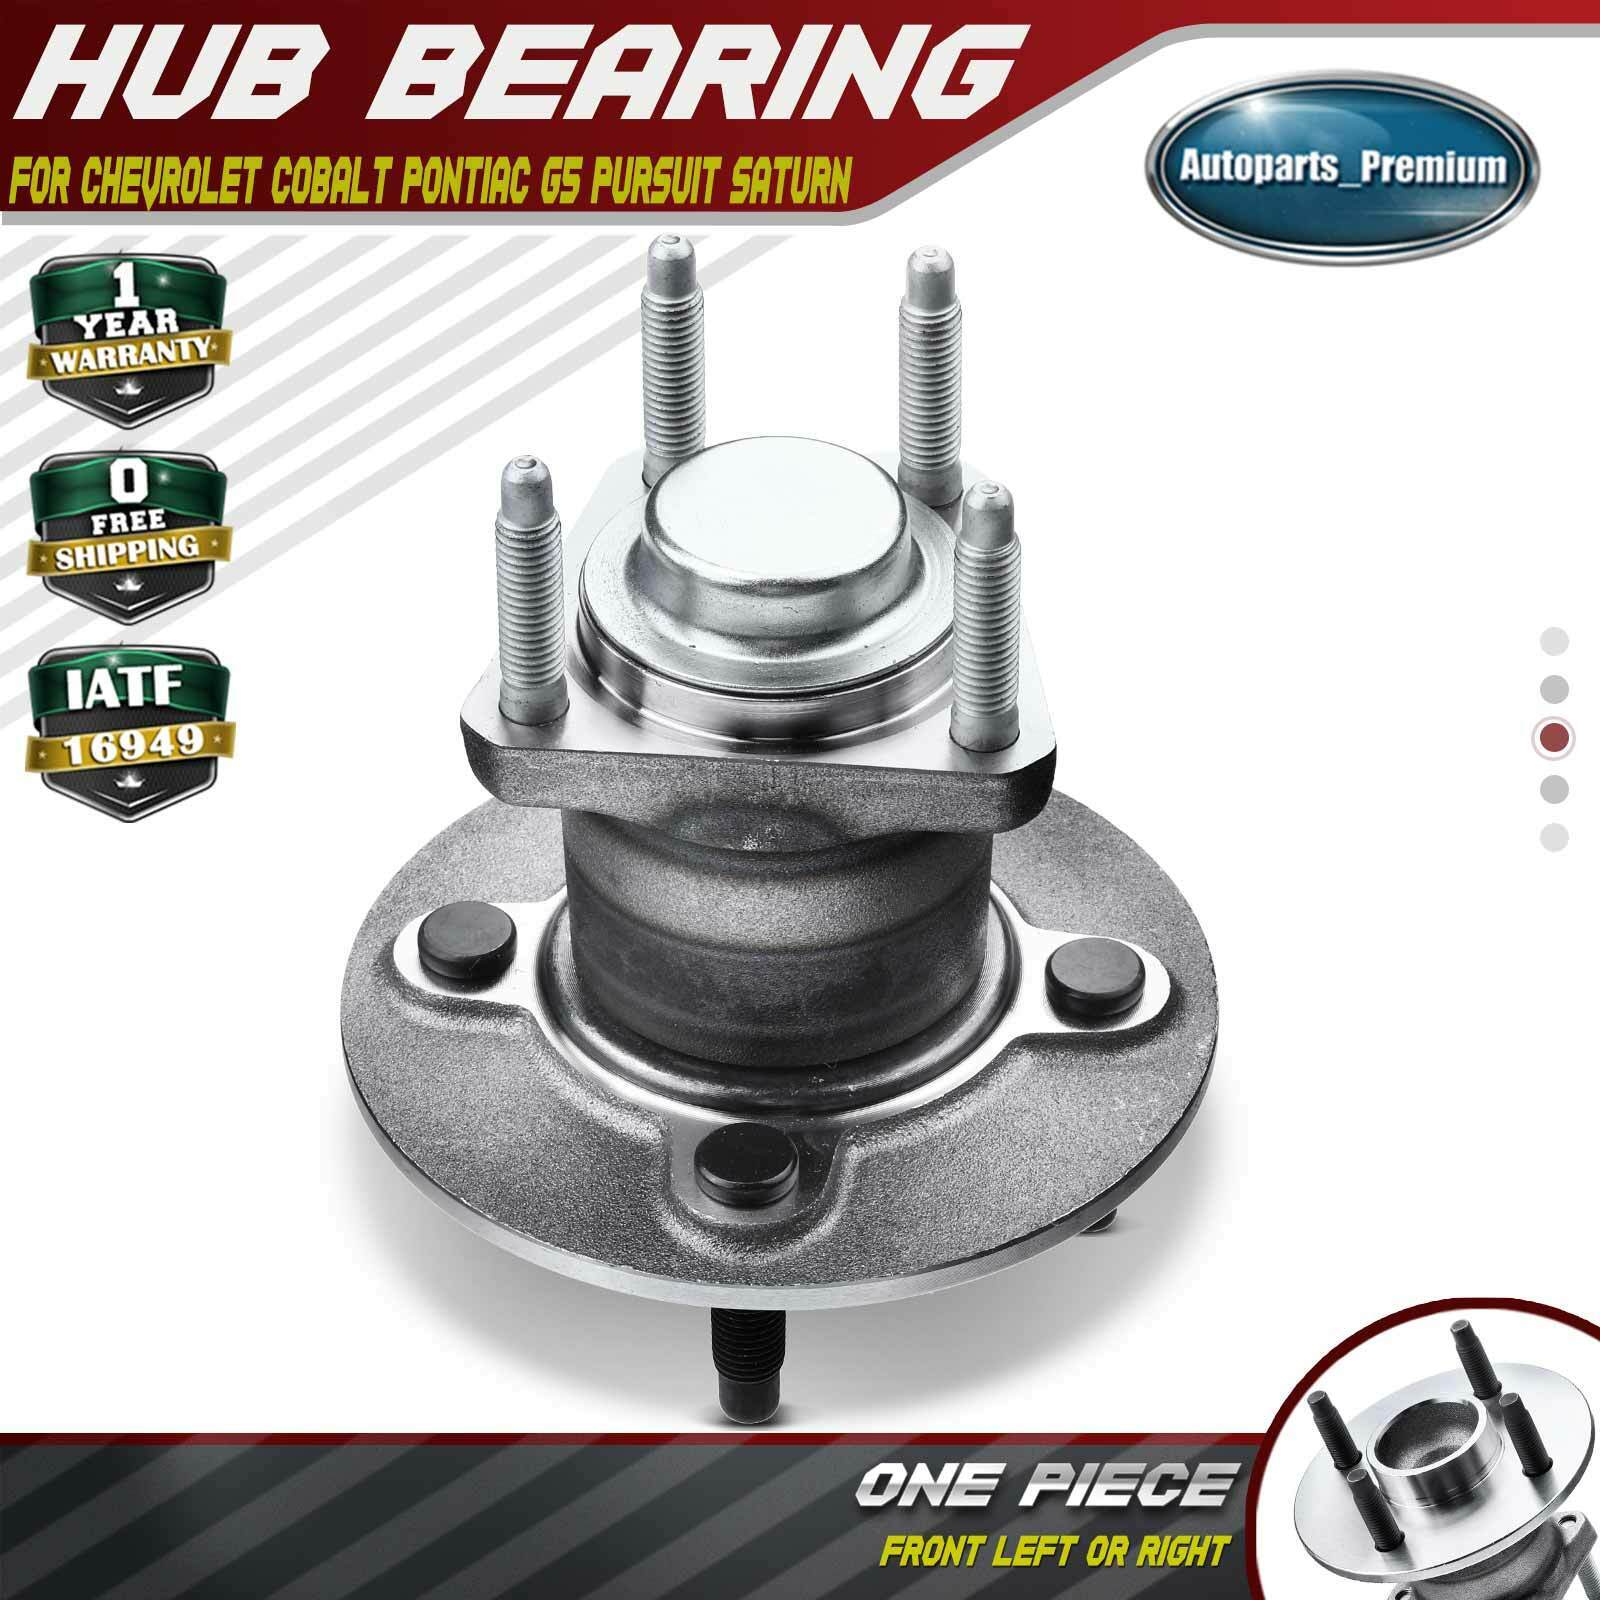 Front LH or RH Wheel Bearing Hub Assembly for Chevy Cobalt 05-10 Pontiac Pursuit